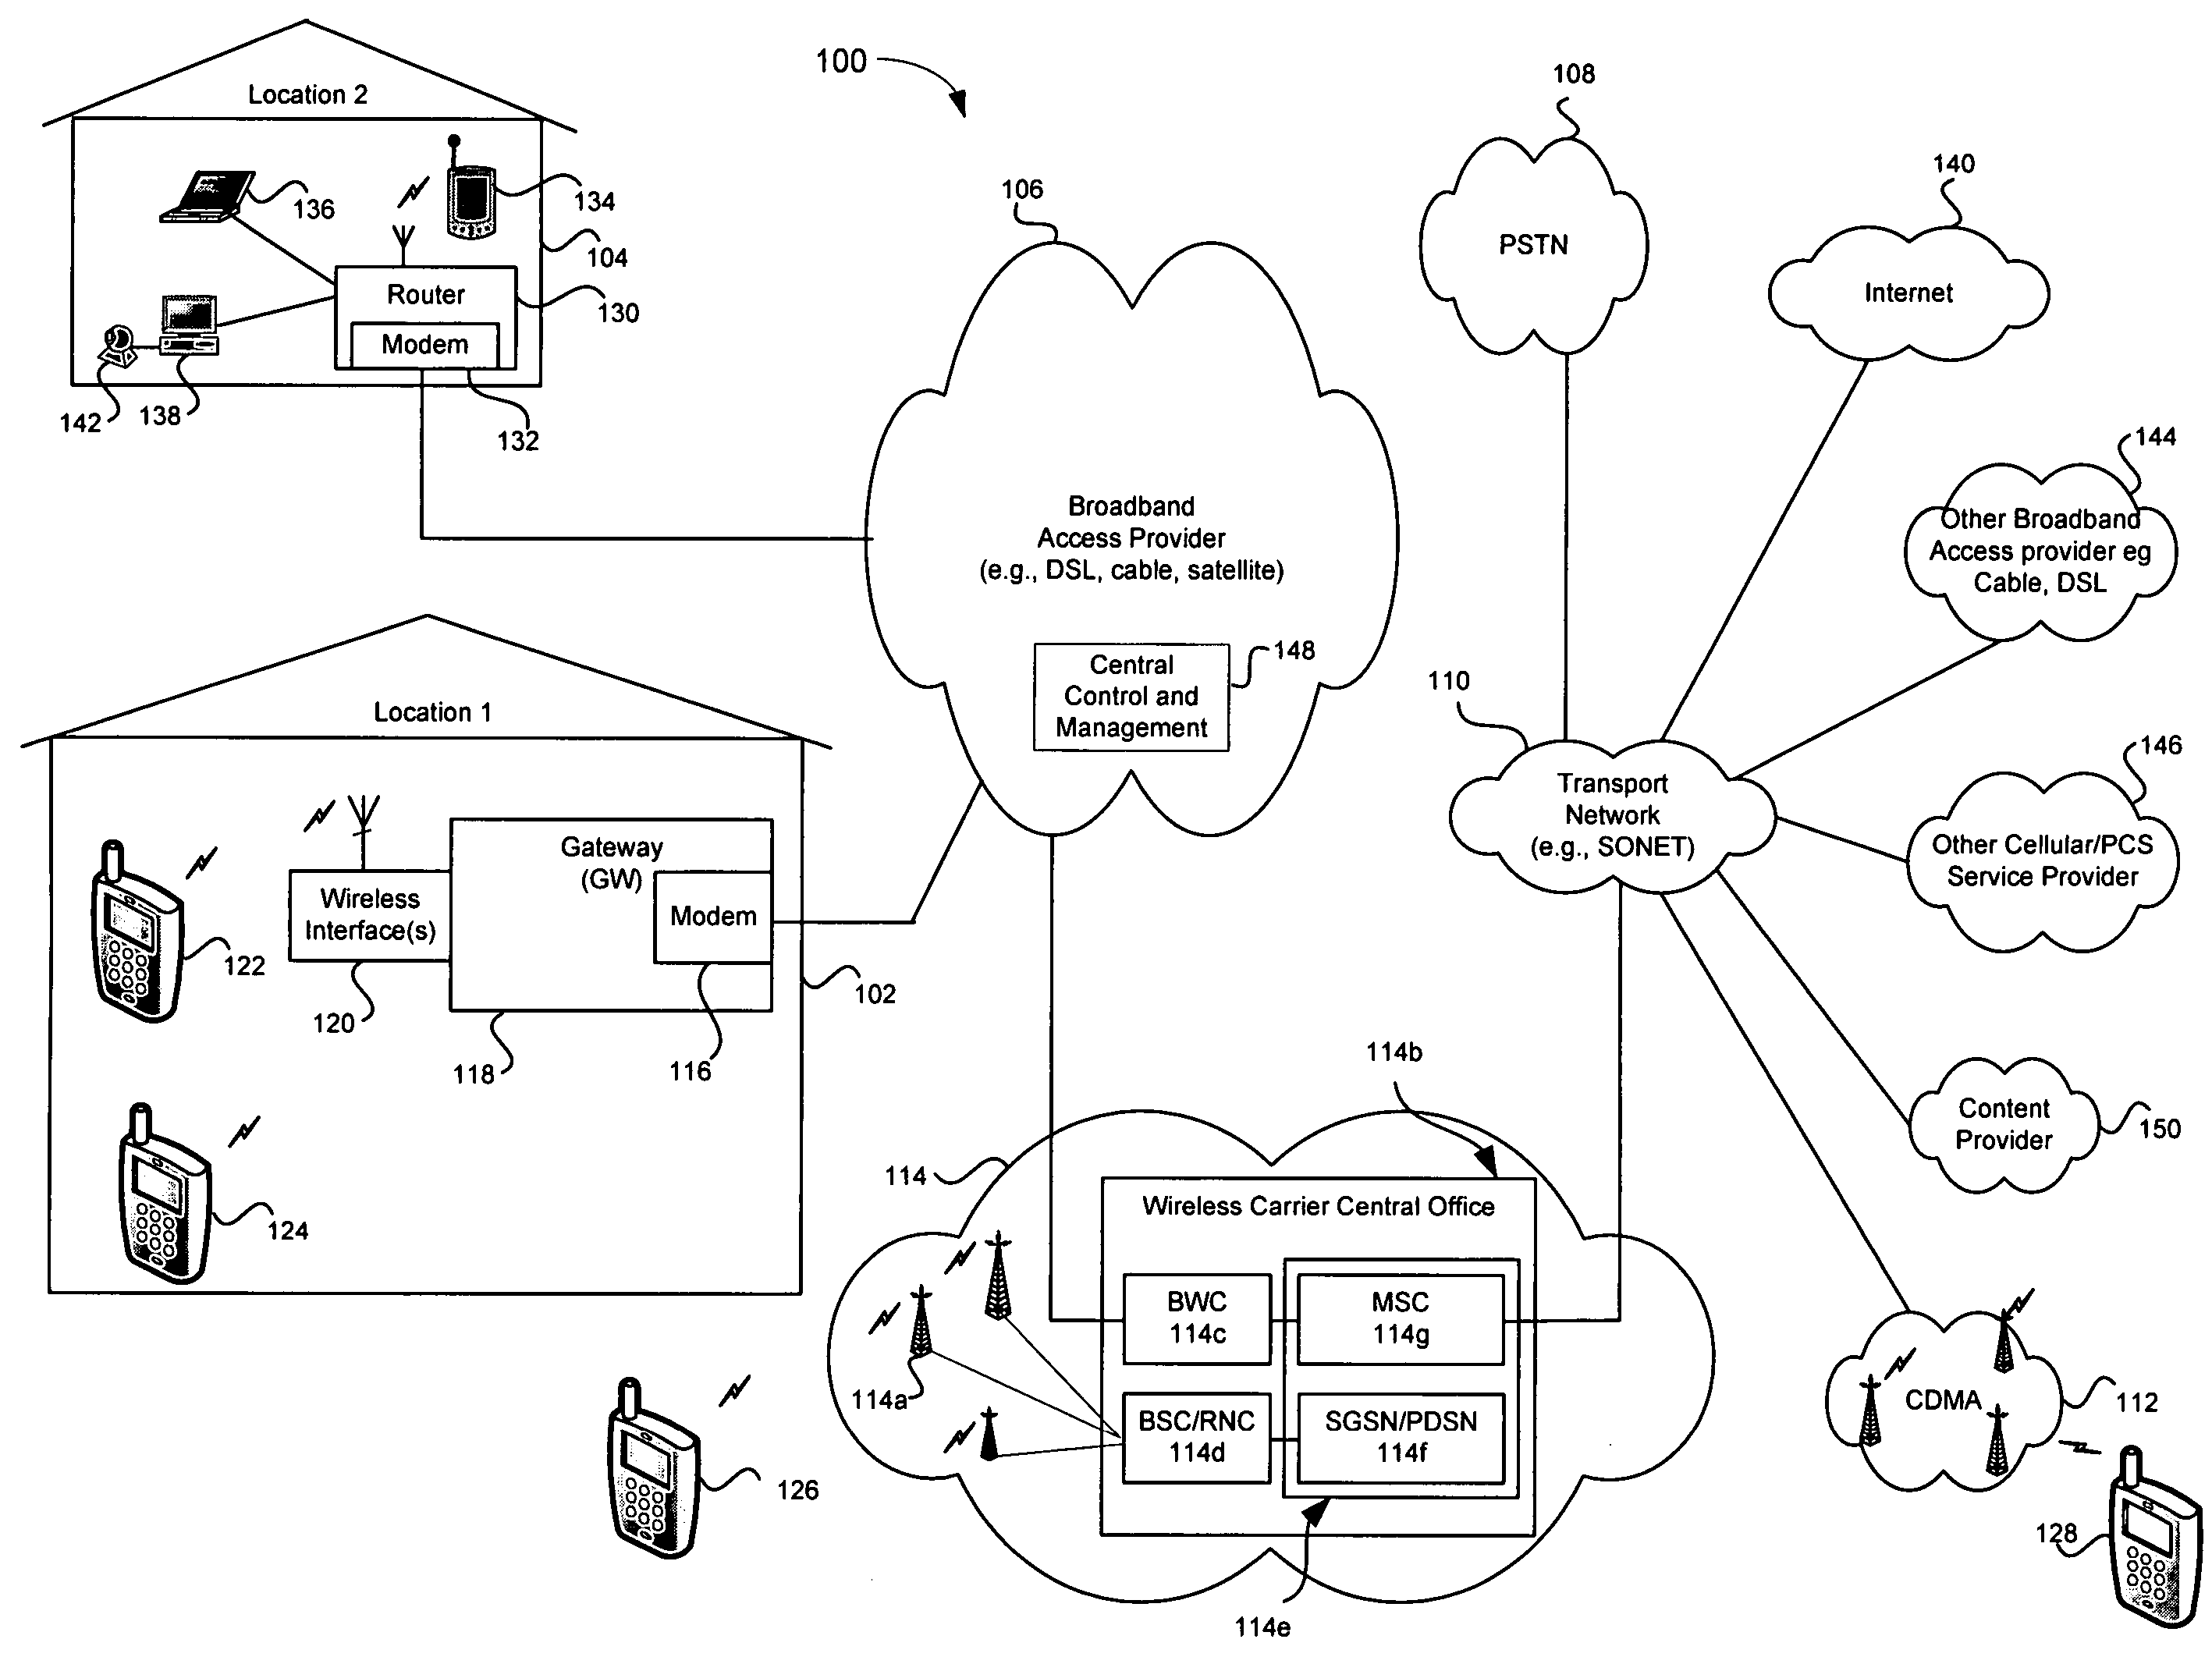 Method and system for extended network access notification via a broadband access gateway